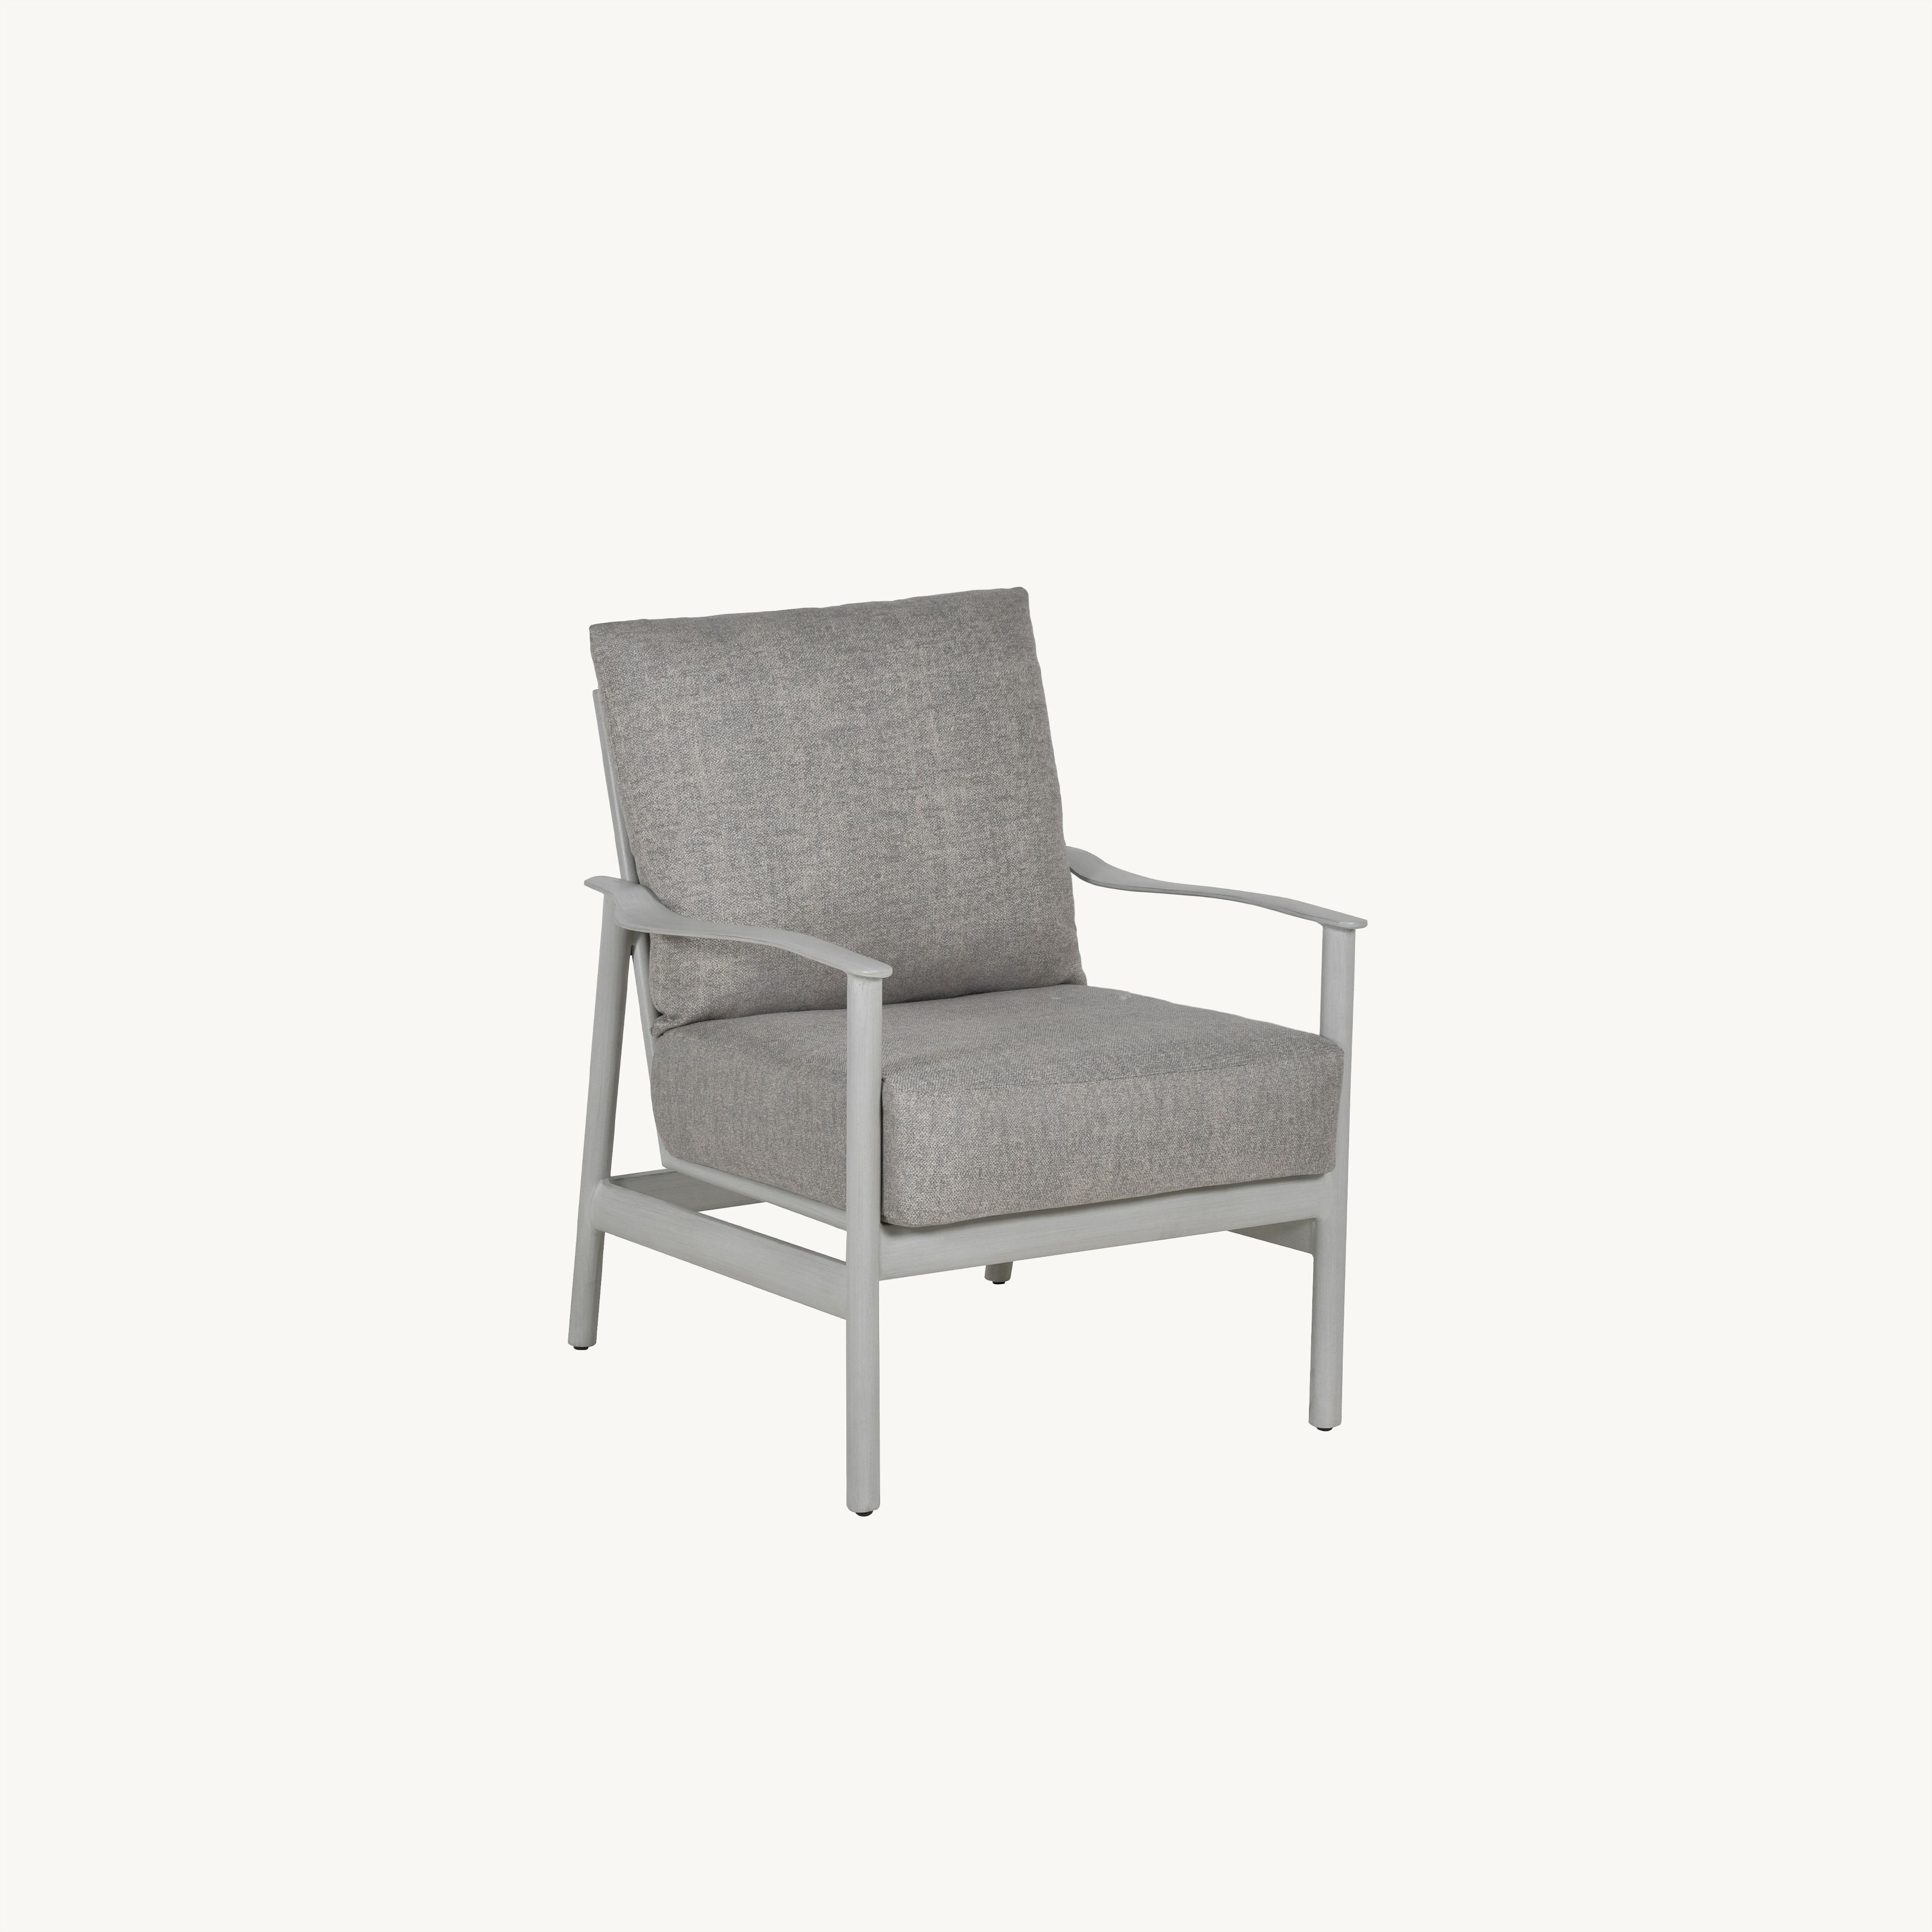 Barbados Cushion Lounge Chair By Castelle